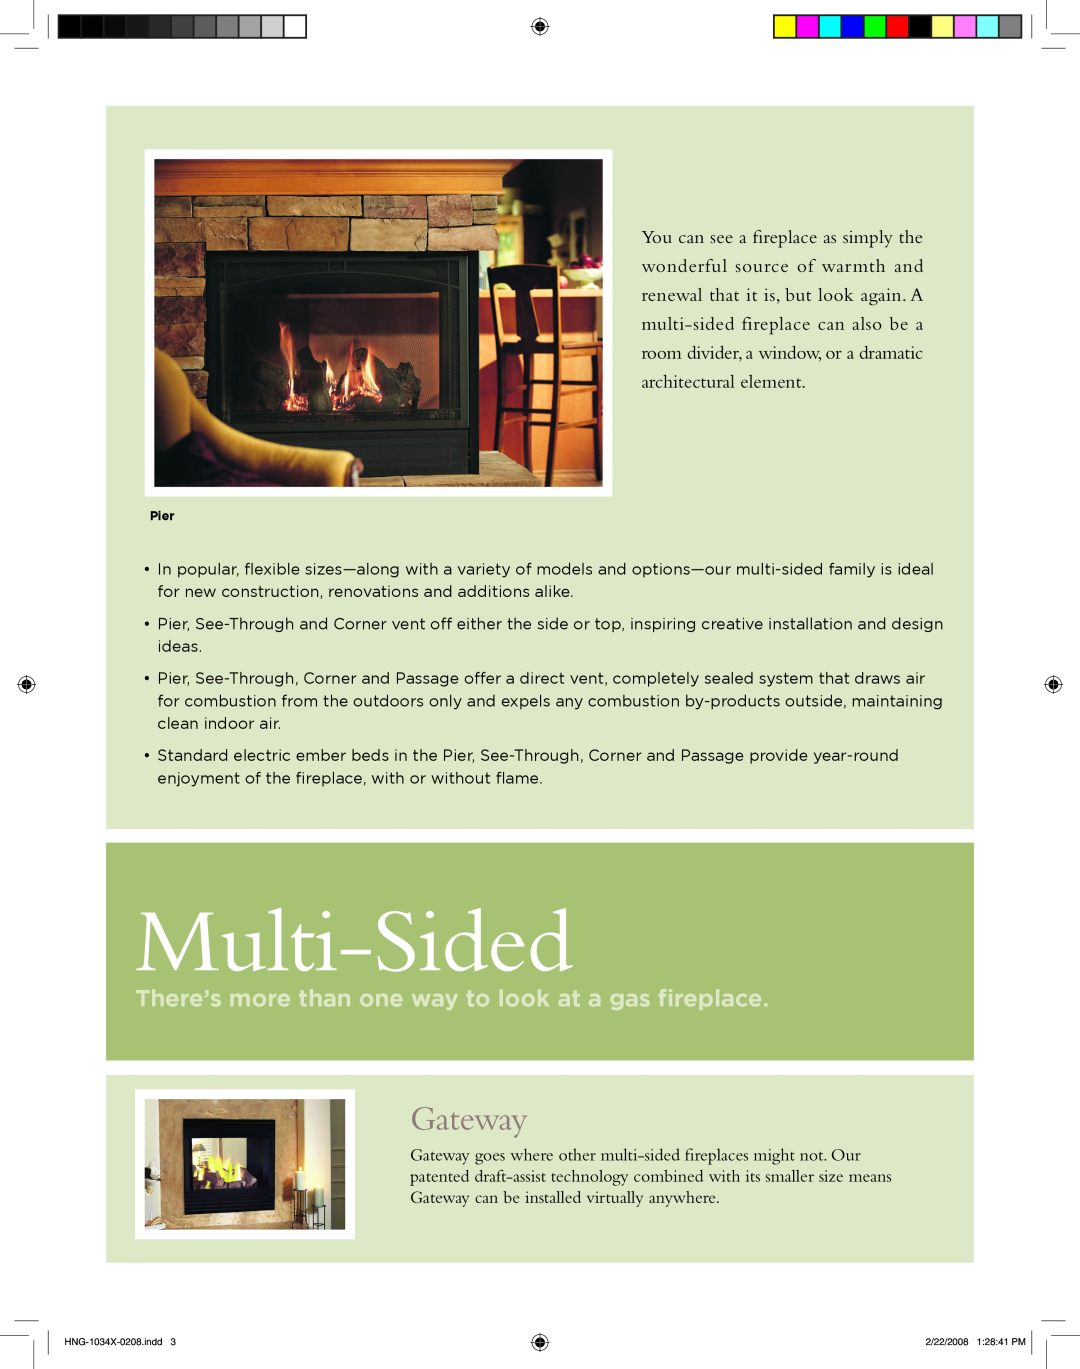 Hearth and Home Technologies GATEWAY manual Gateway, Multi-Sided, There’s more than one way to look at a gas fireplace 